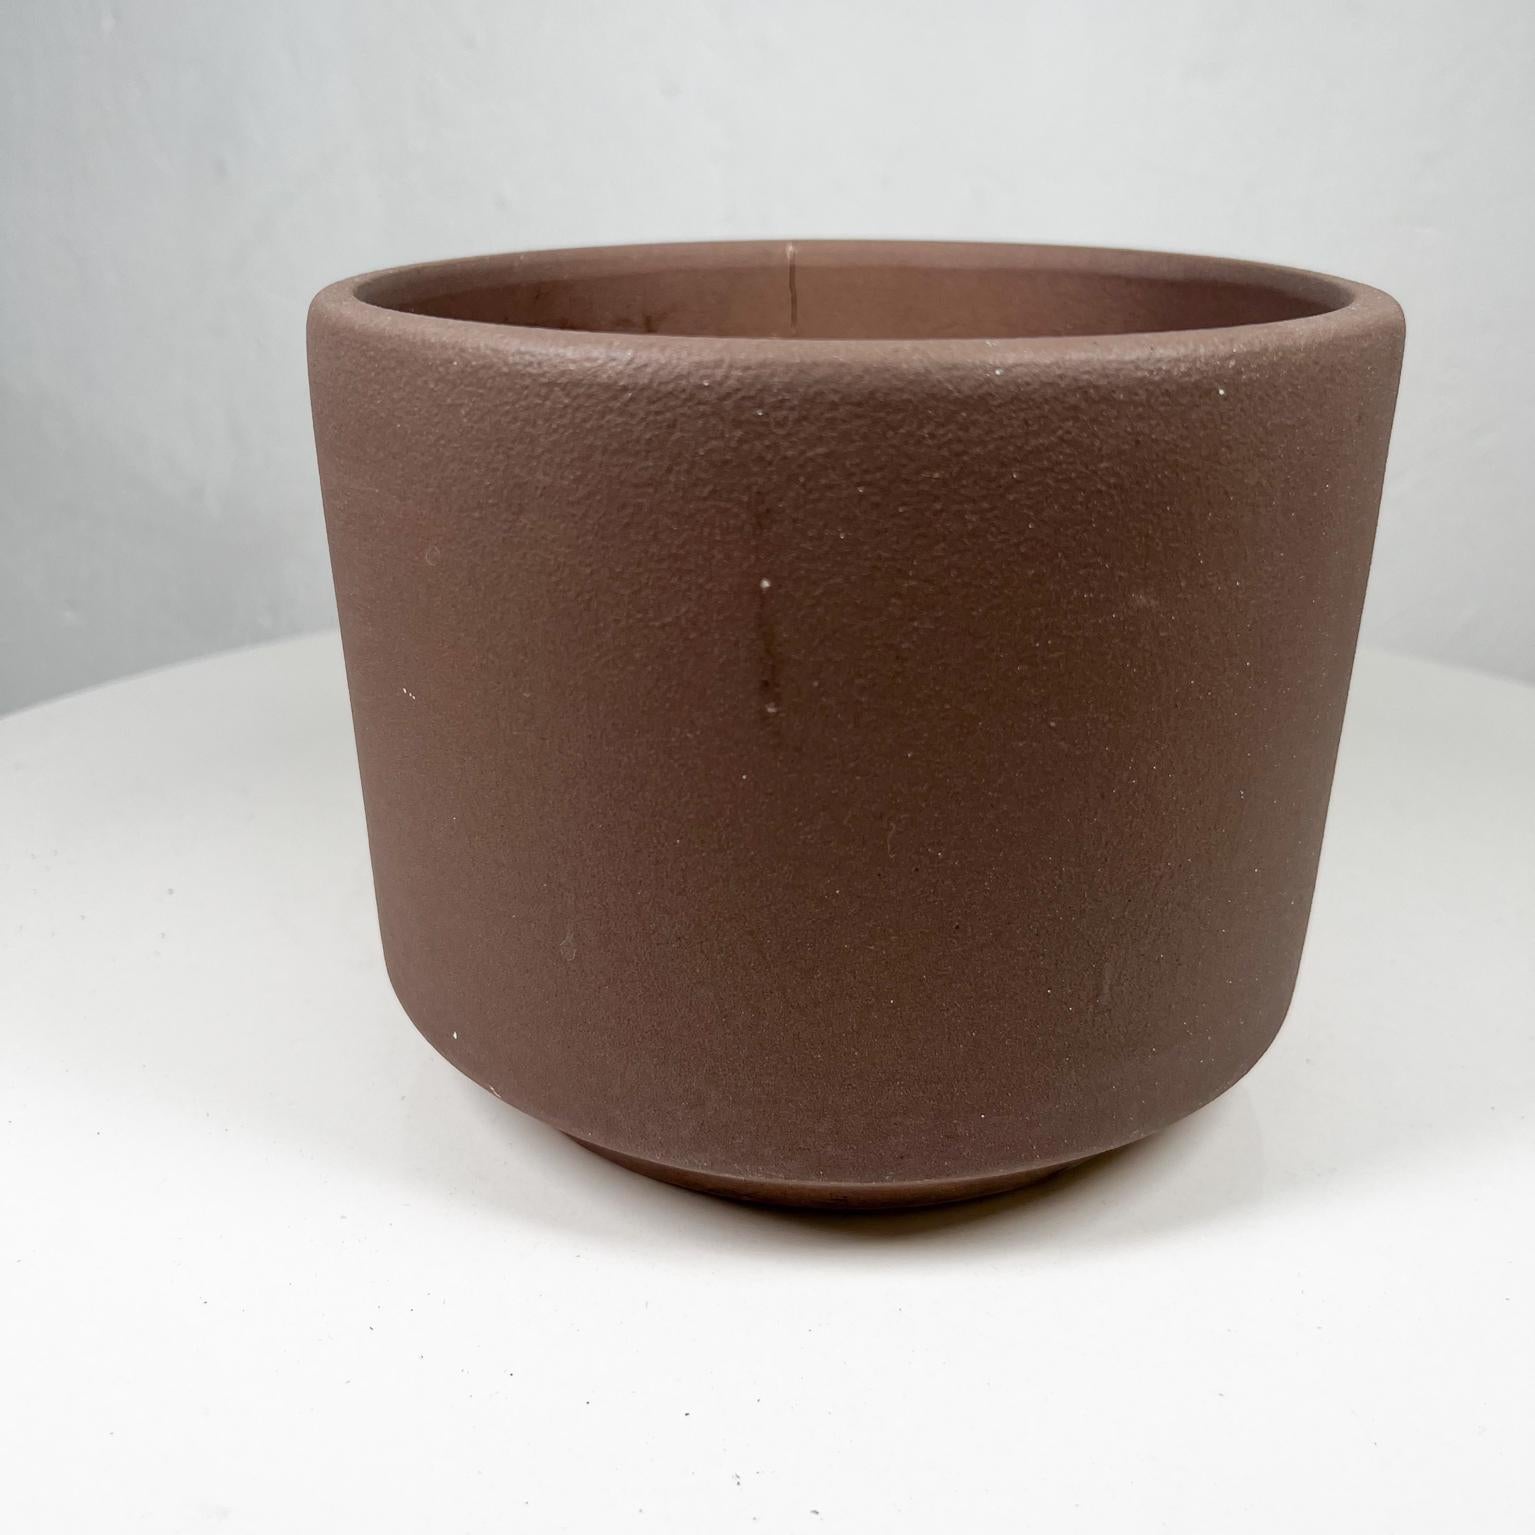 1960s Architectural Pottery Gainey Ceramics Brown Planter La Verne, Calif
Stamped Gainey
7.75 diameter x 5.75 h
Unrestored preowned vintage condition. Note wear visible.
Refer to all images for condition.